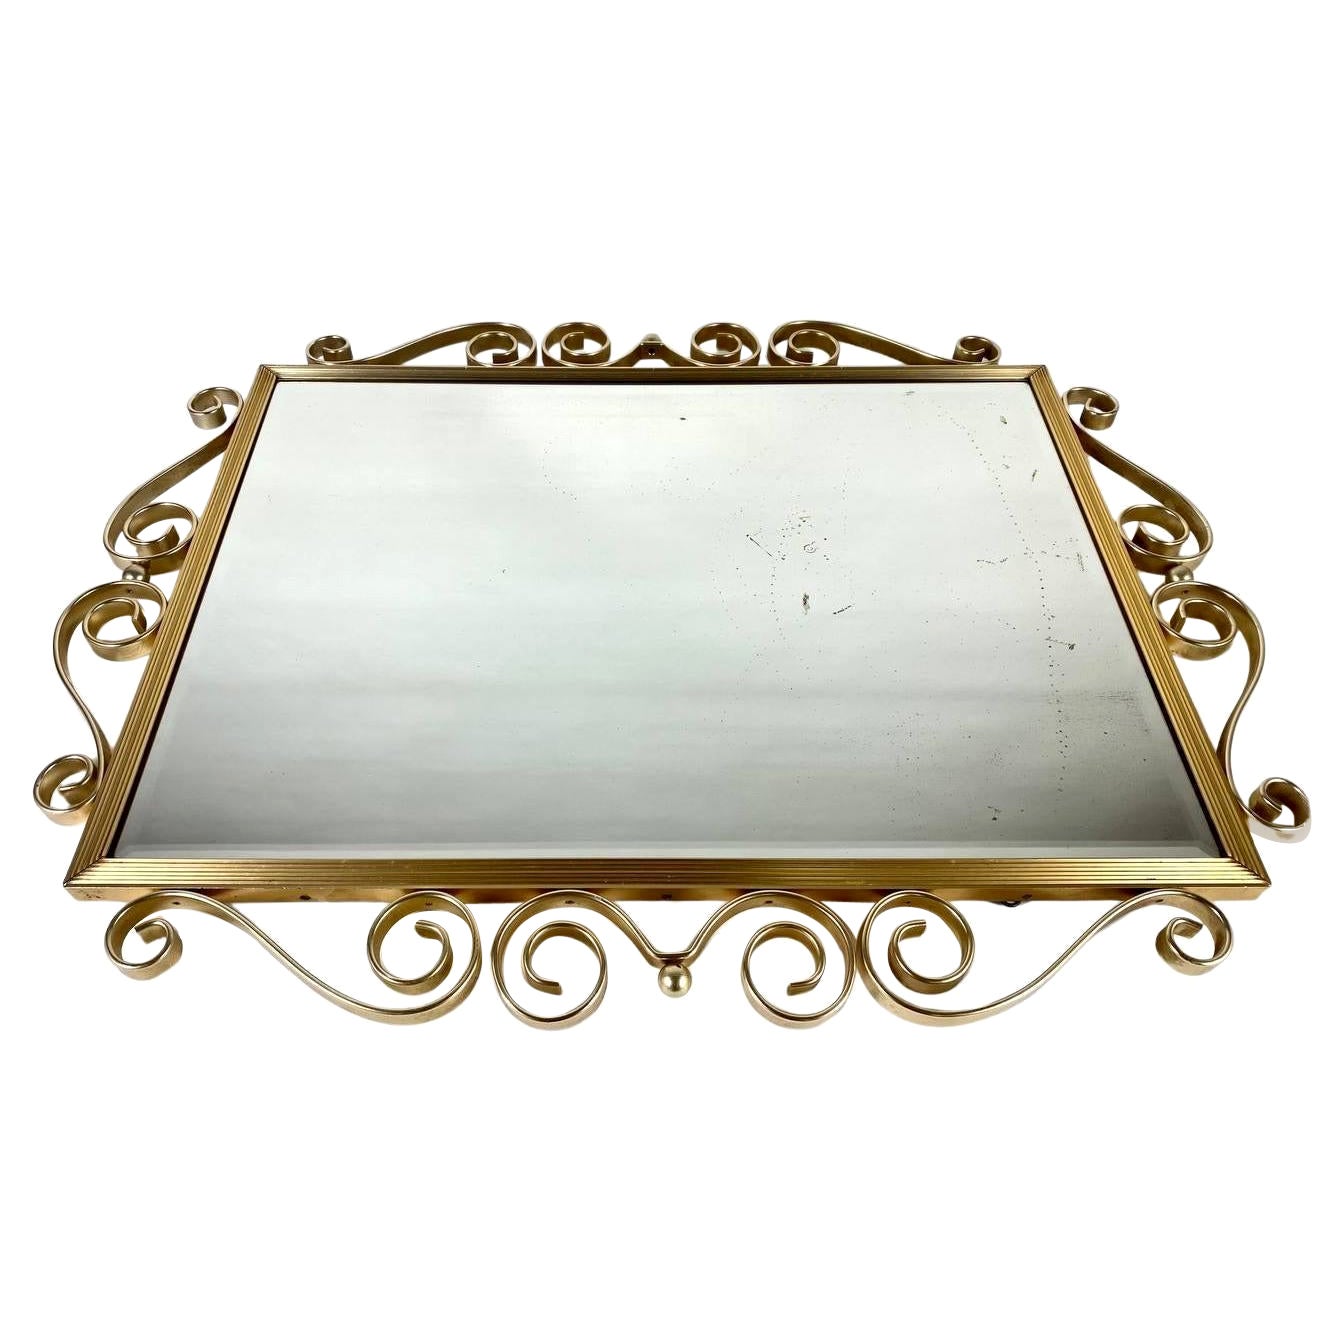 Hollywood Regency Style Wall Mirror in Forged Brass Frame, Belgium, 1960s